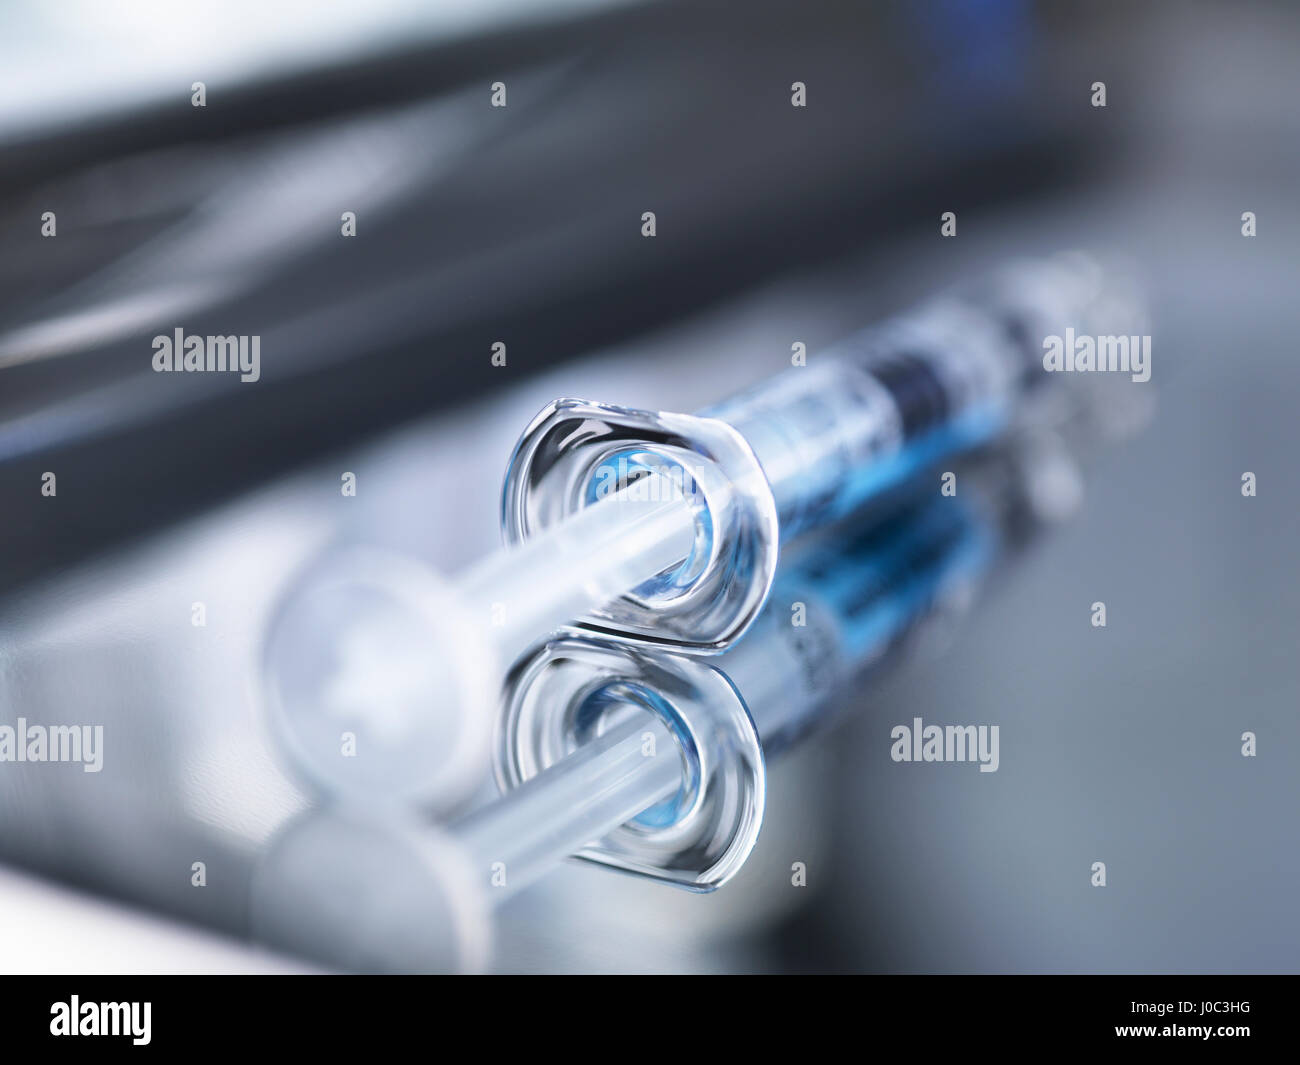 Syringe on surgical tray ready for use, close-up Stock Photo